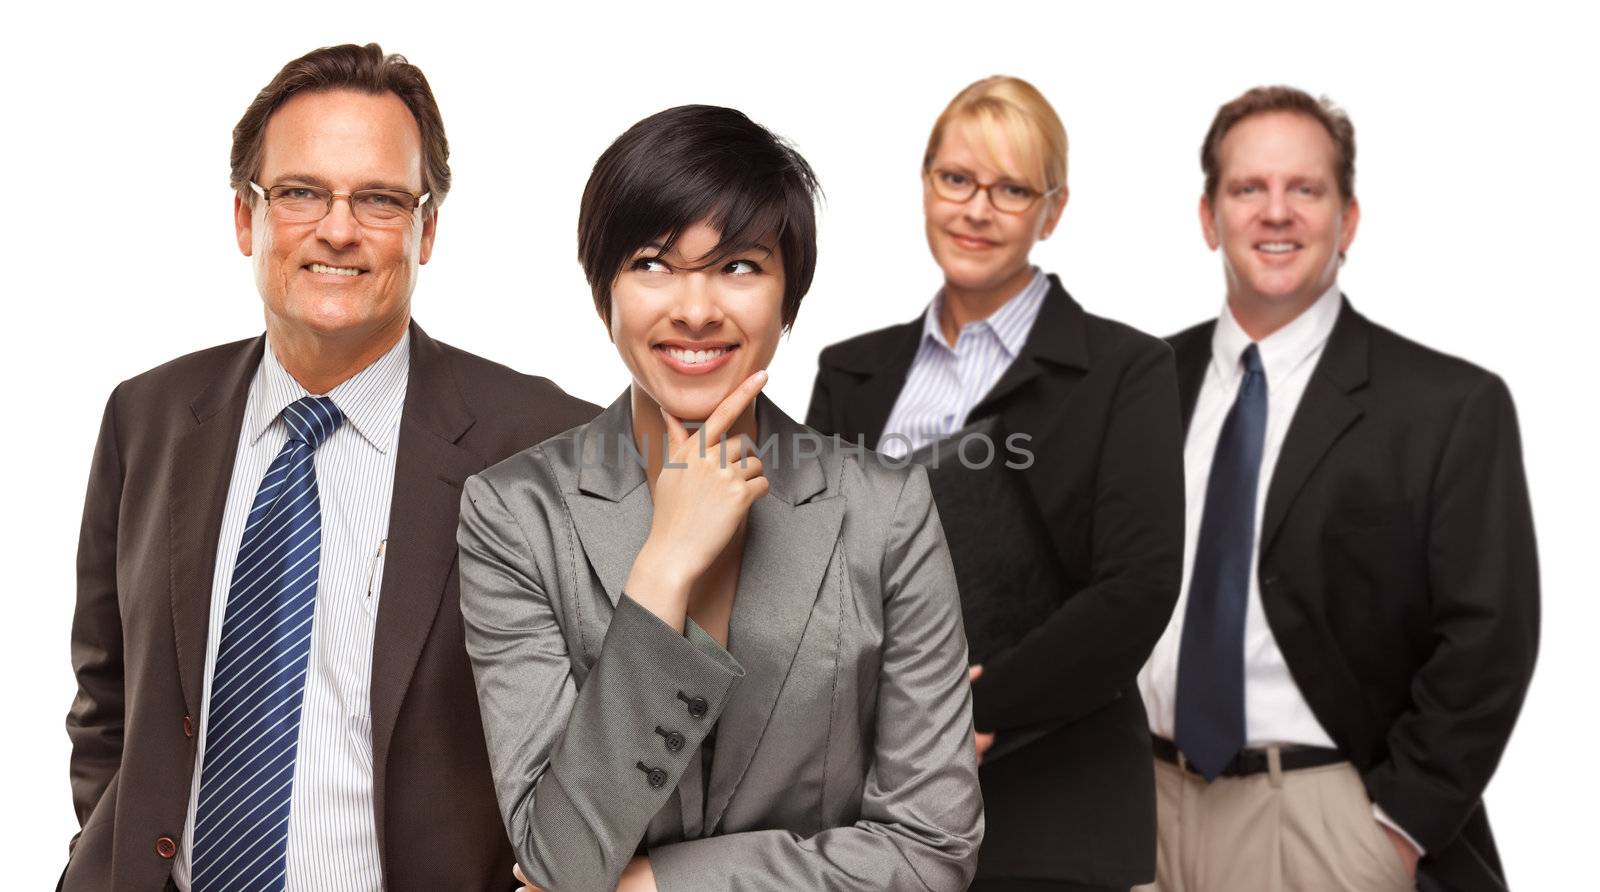 Smiling Businessmen and Businesswomen Isolated on a White Background.